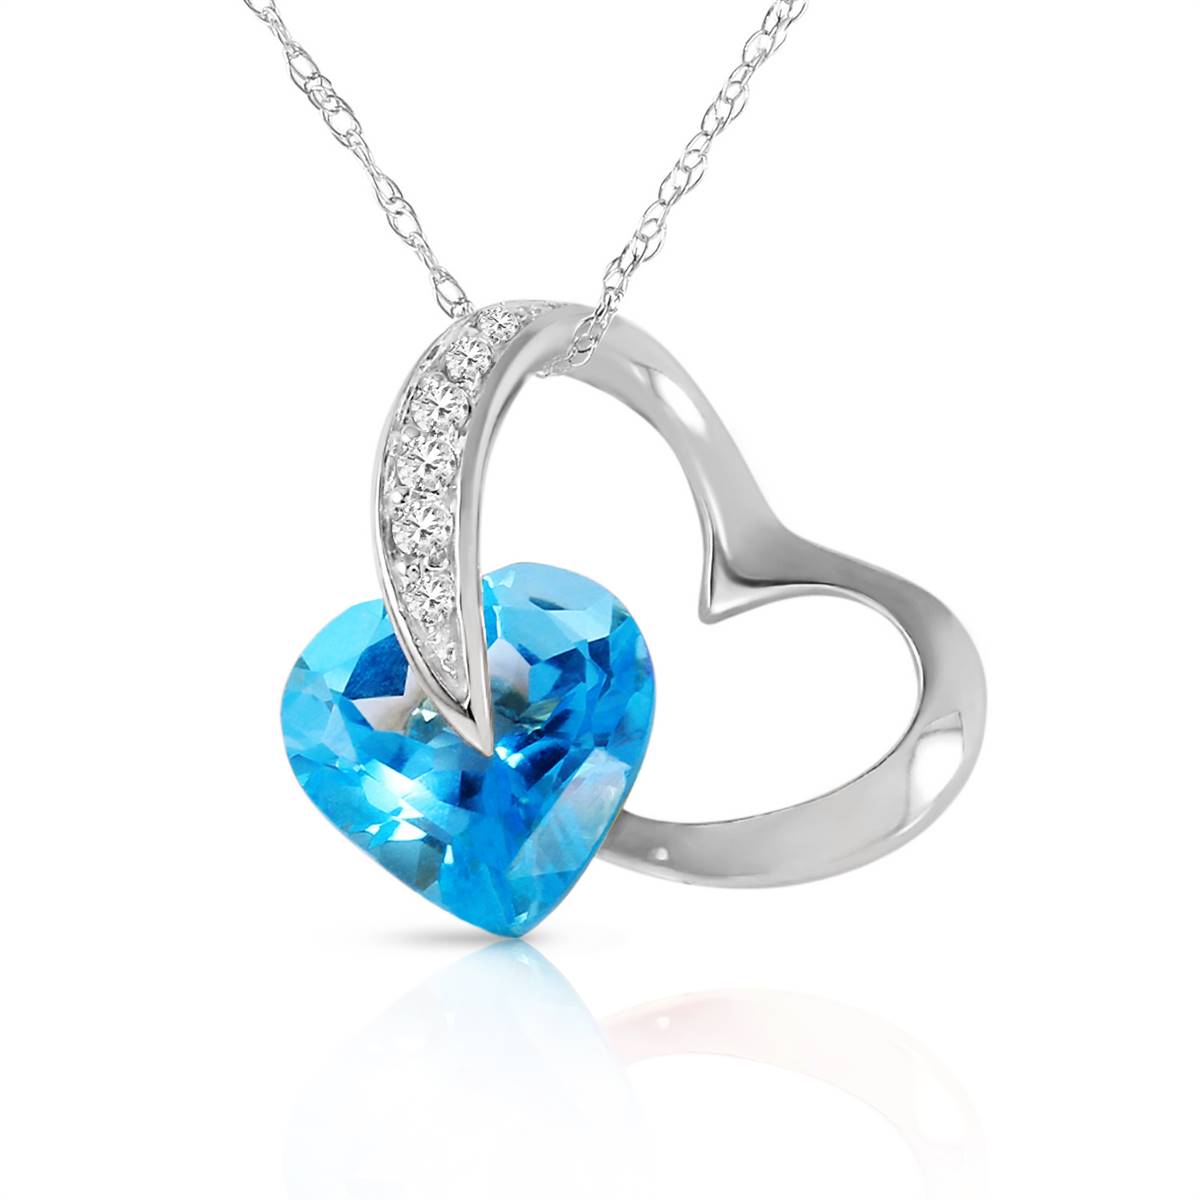 14K Solid White Gold Heart Necklace w/ Natural Diamonds & Blue Topaz